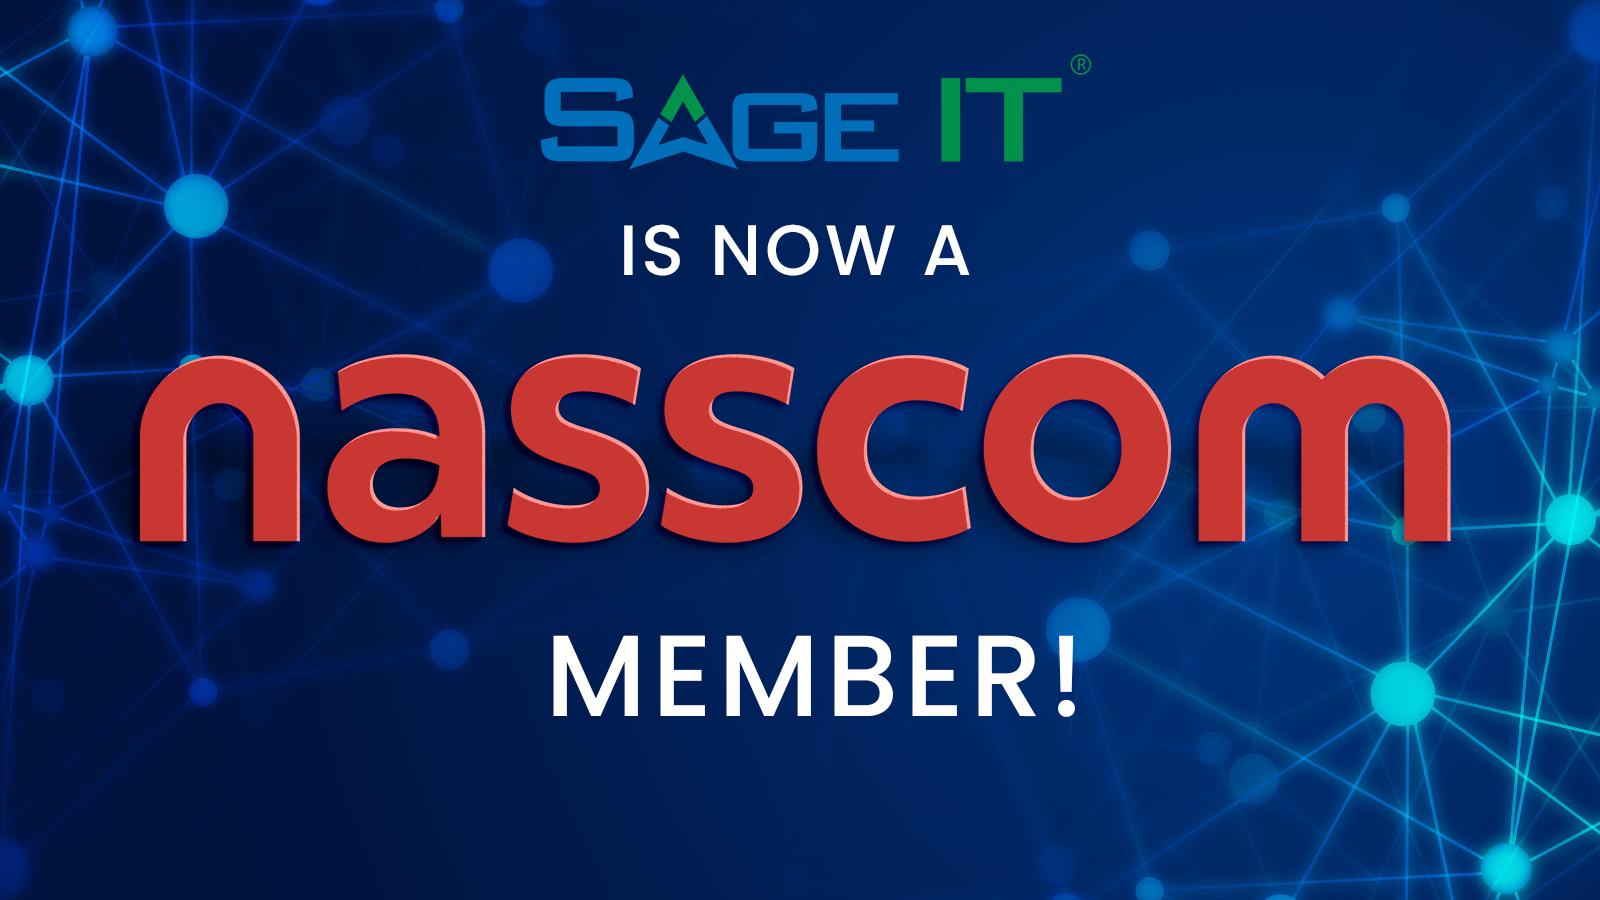 Image of Sage IT's logo and the NASSCOM logo side by side, representing partnership